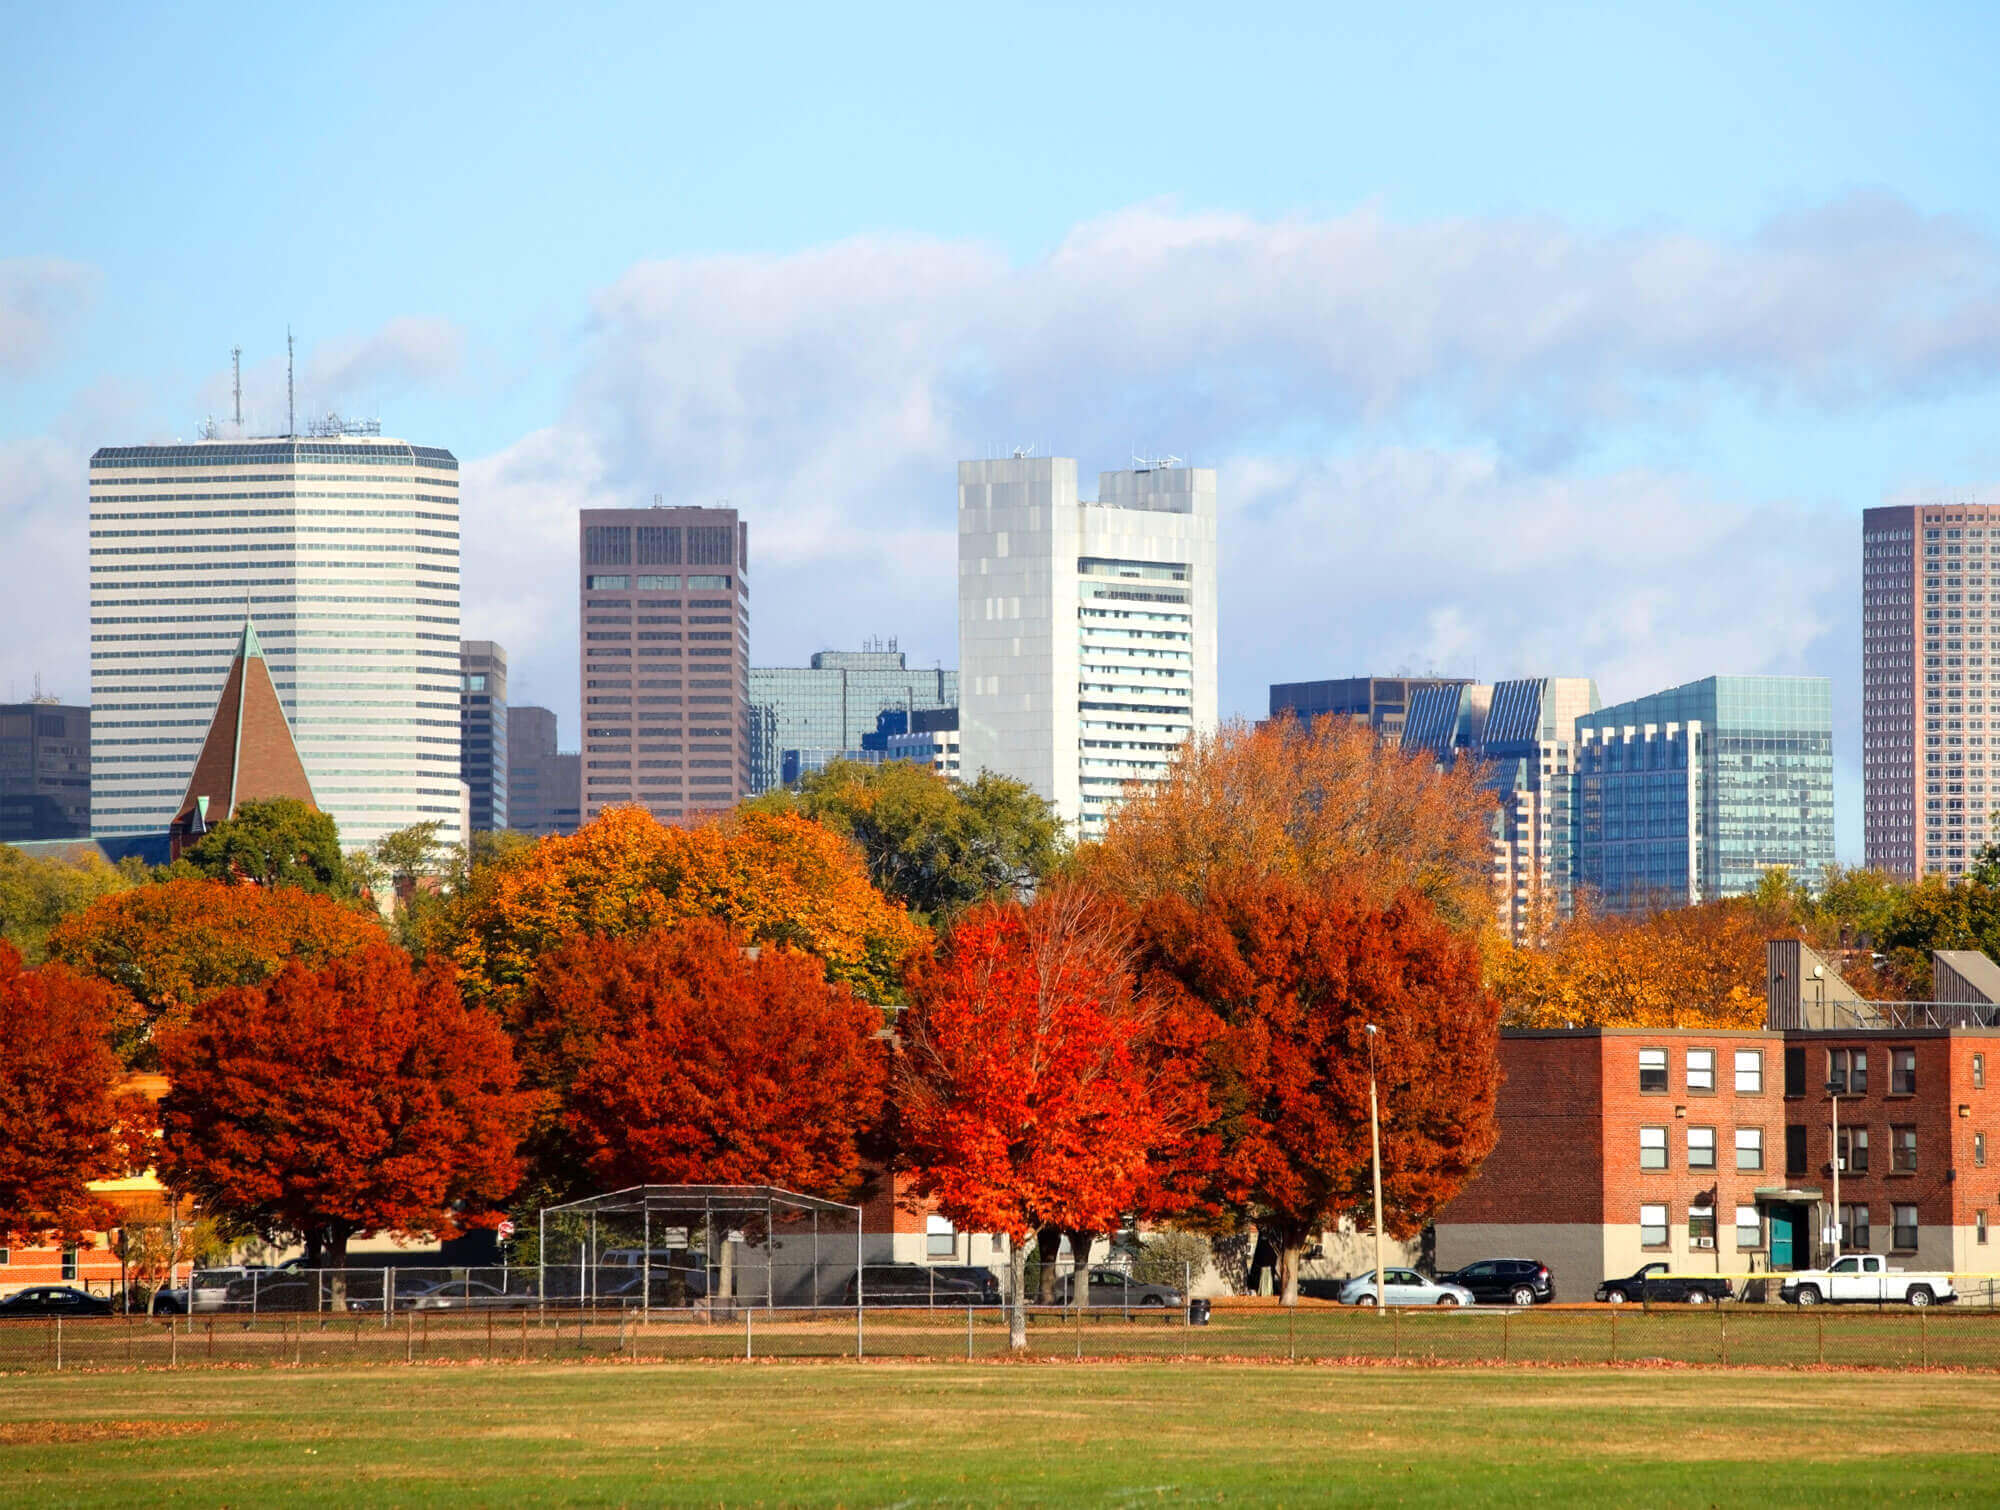 Municipal baseball field surrounded by vivid trees in fall colors with Boston, MA buildings looming